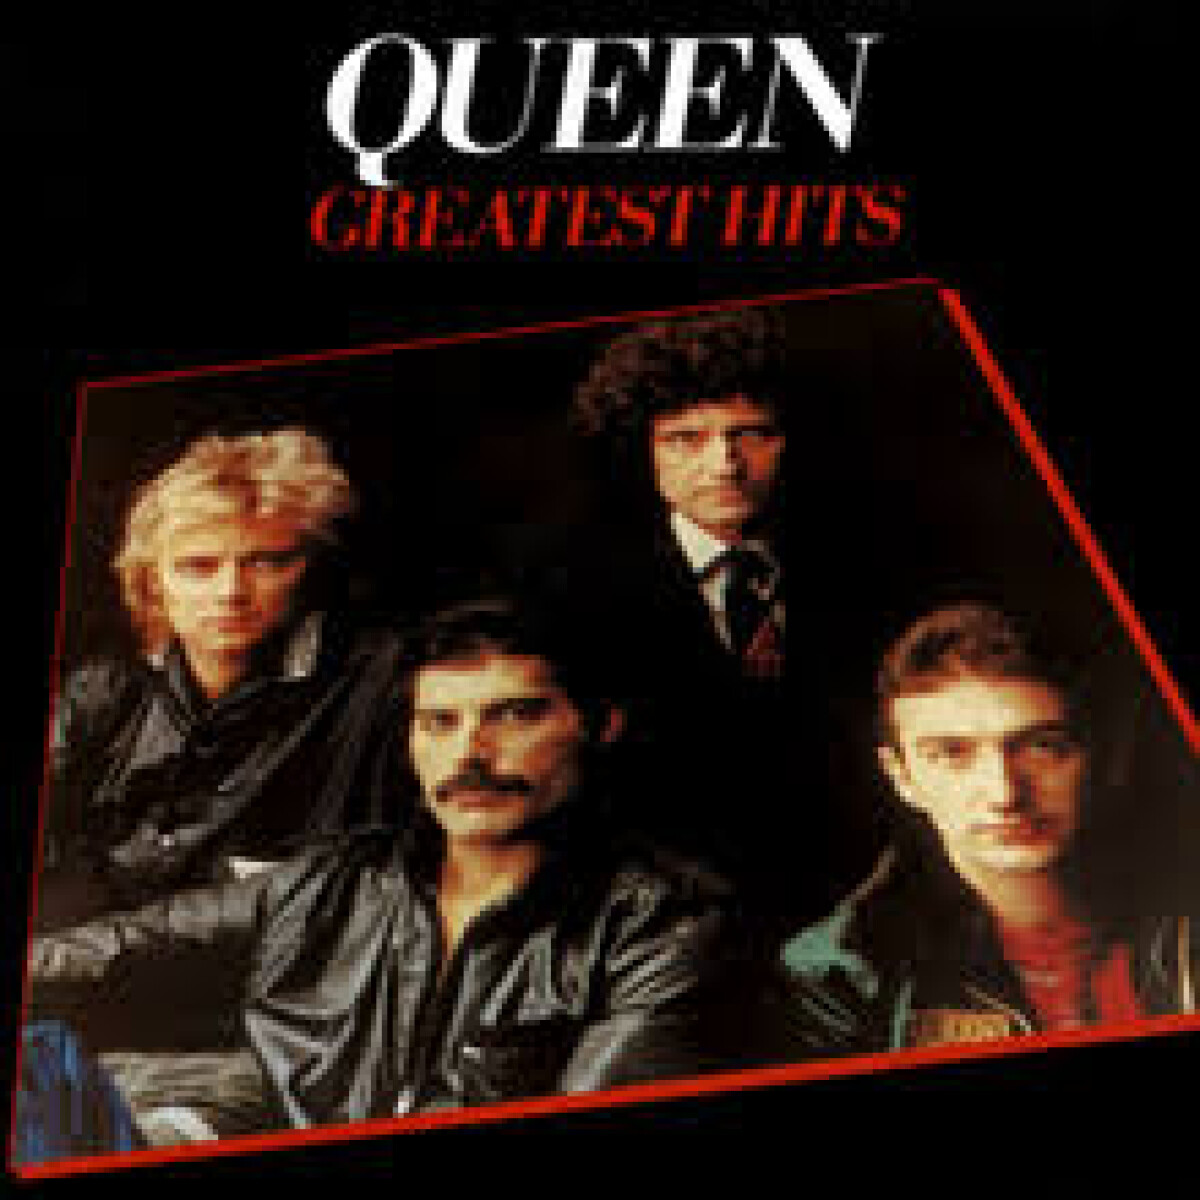 Queen - Greatest Hits I (remastered) - Cd 